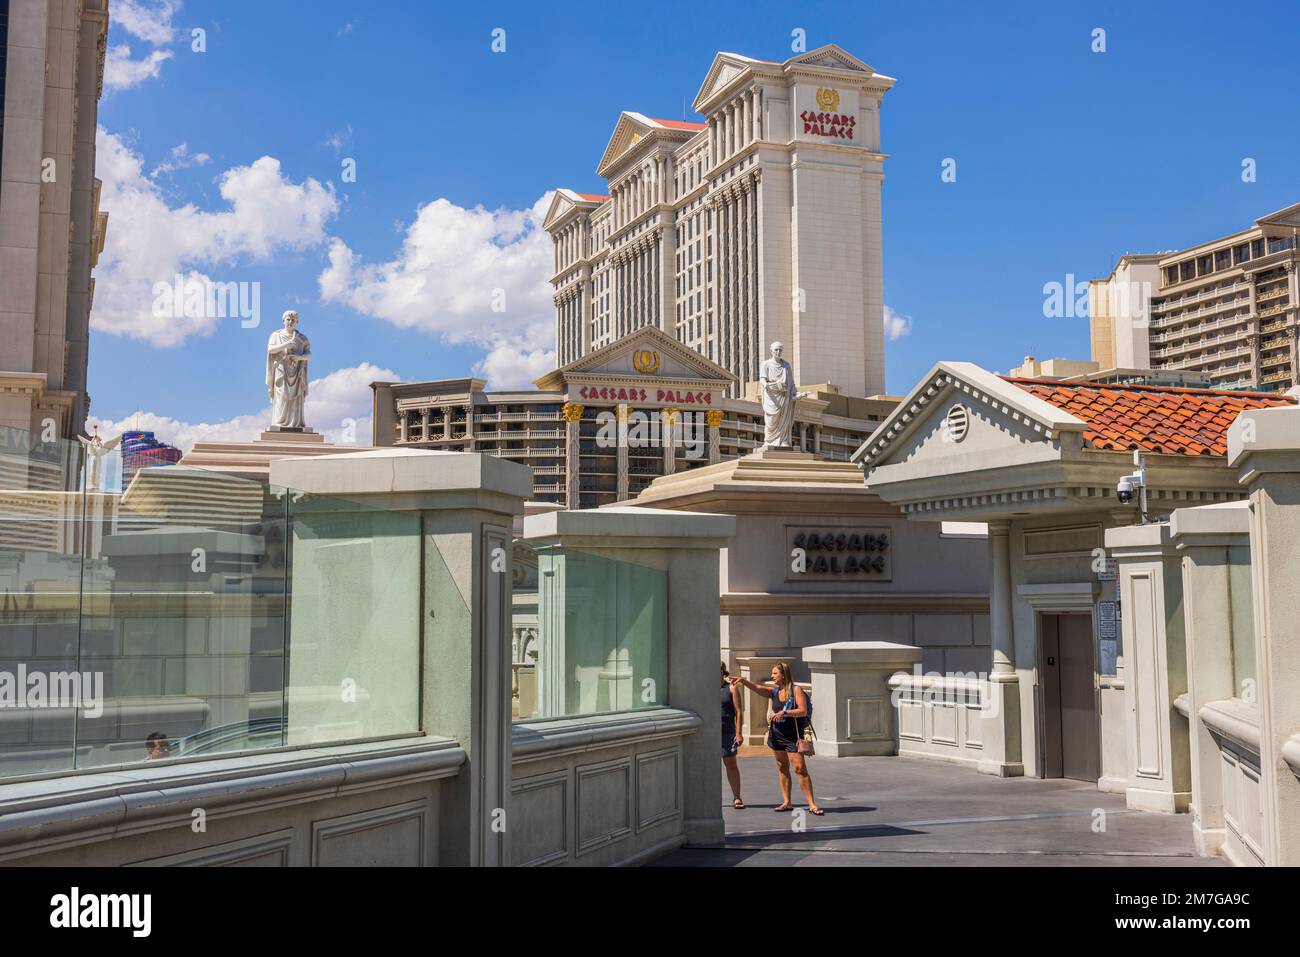 Street Sign for Las Vegas Blvd, known as the Las Vegas Strip, in Las Vegas,  NV with hotels and casinos lining the strip along with pedestrian bridges  Stock Photo - Alamy